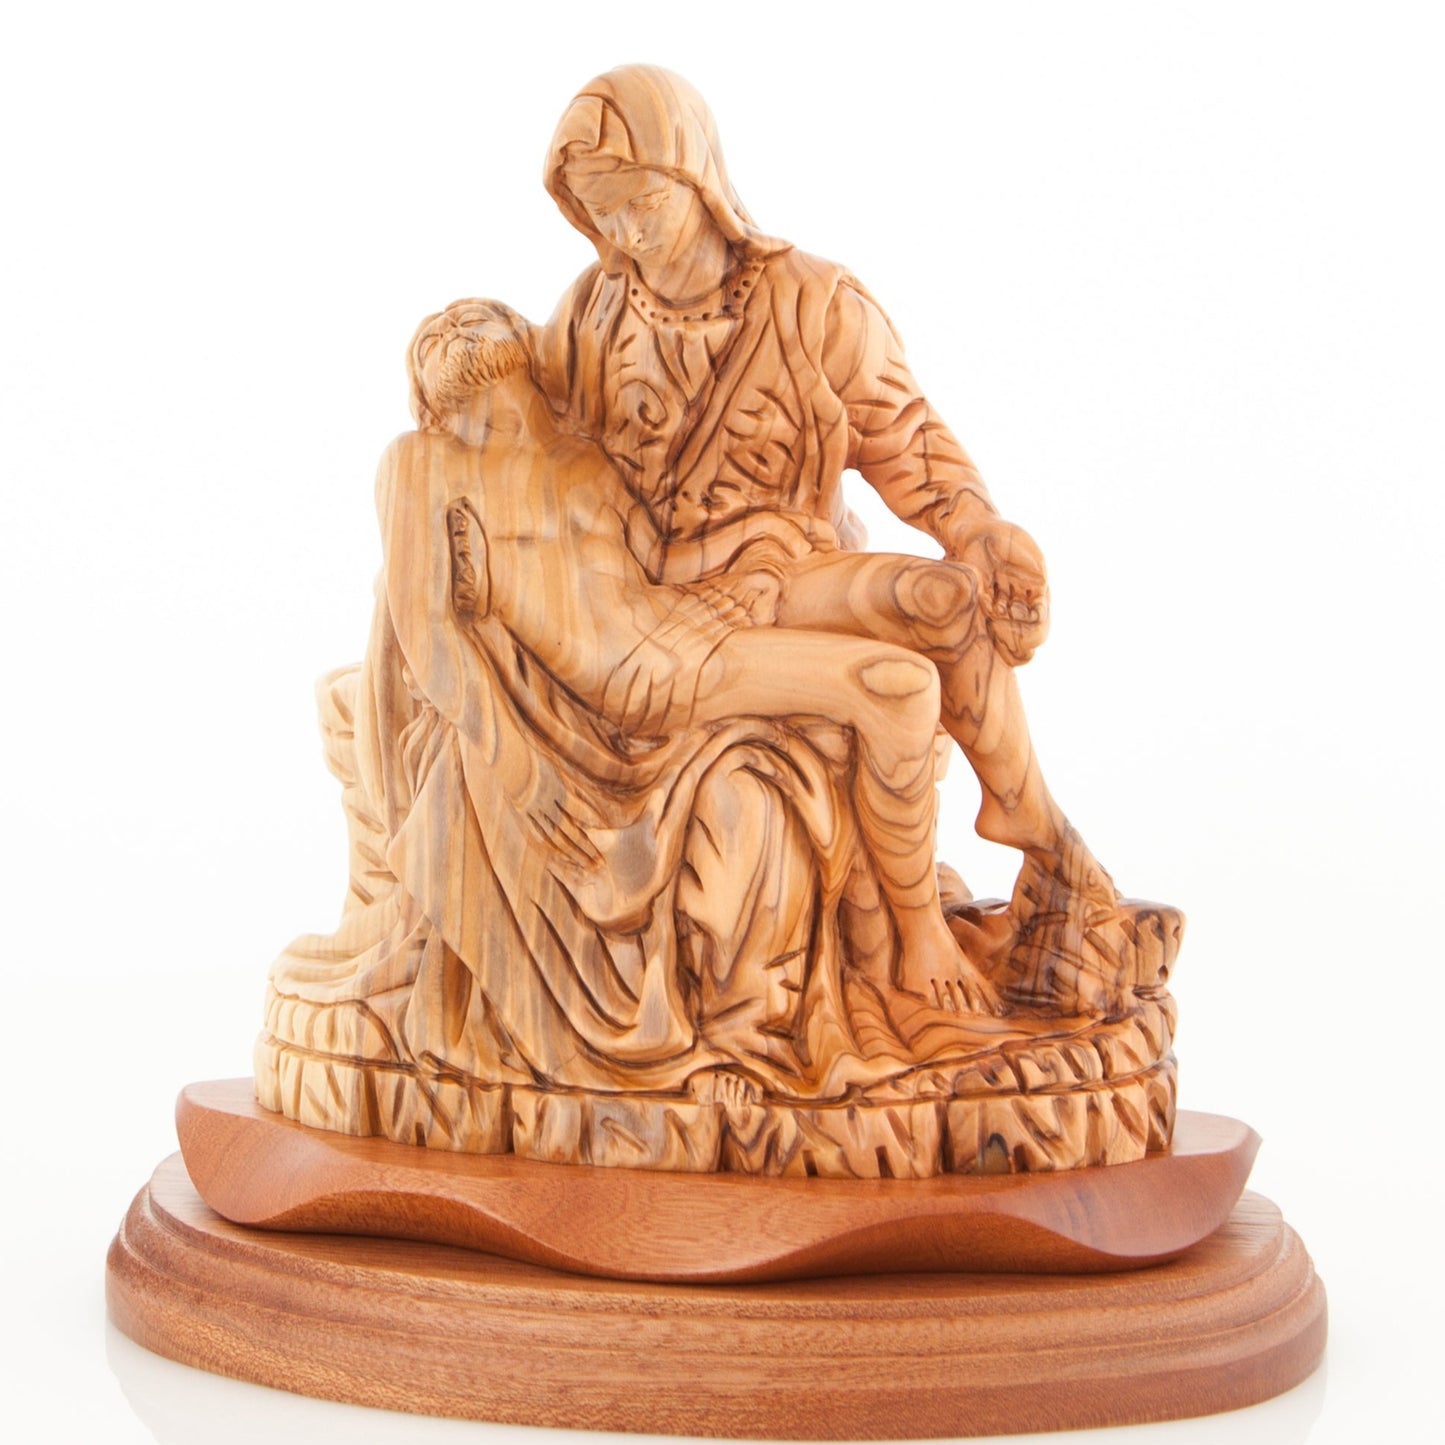 Pieta Carving, Olive Wood Carving Statue from Bethlehem, 8.1"